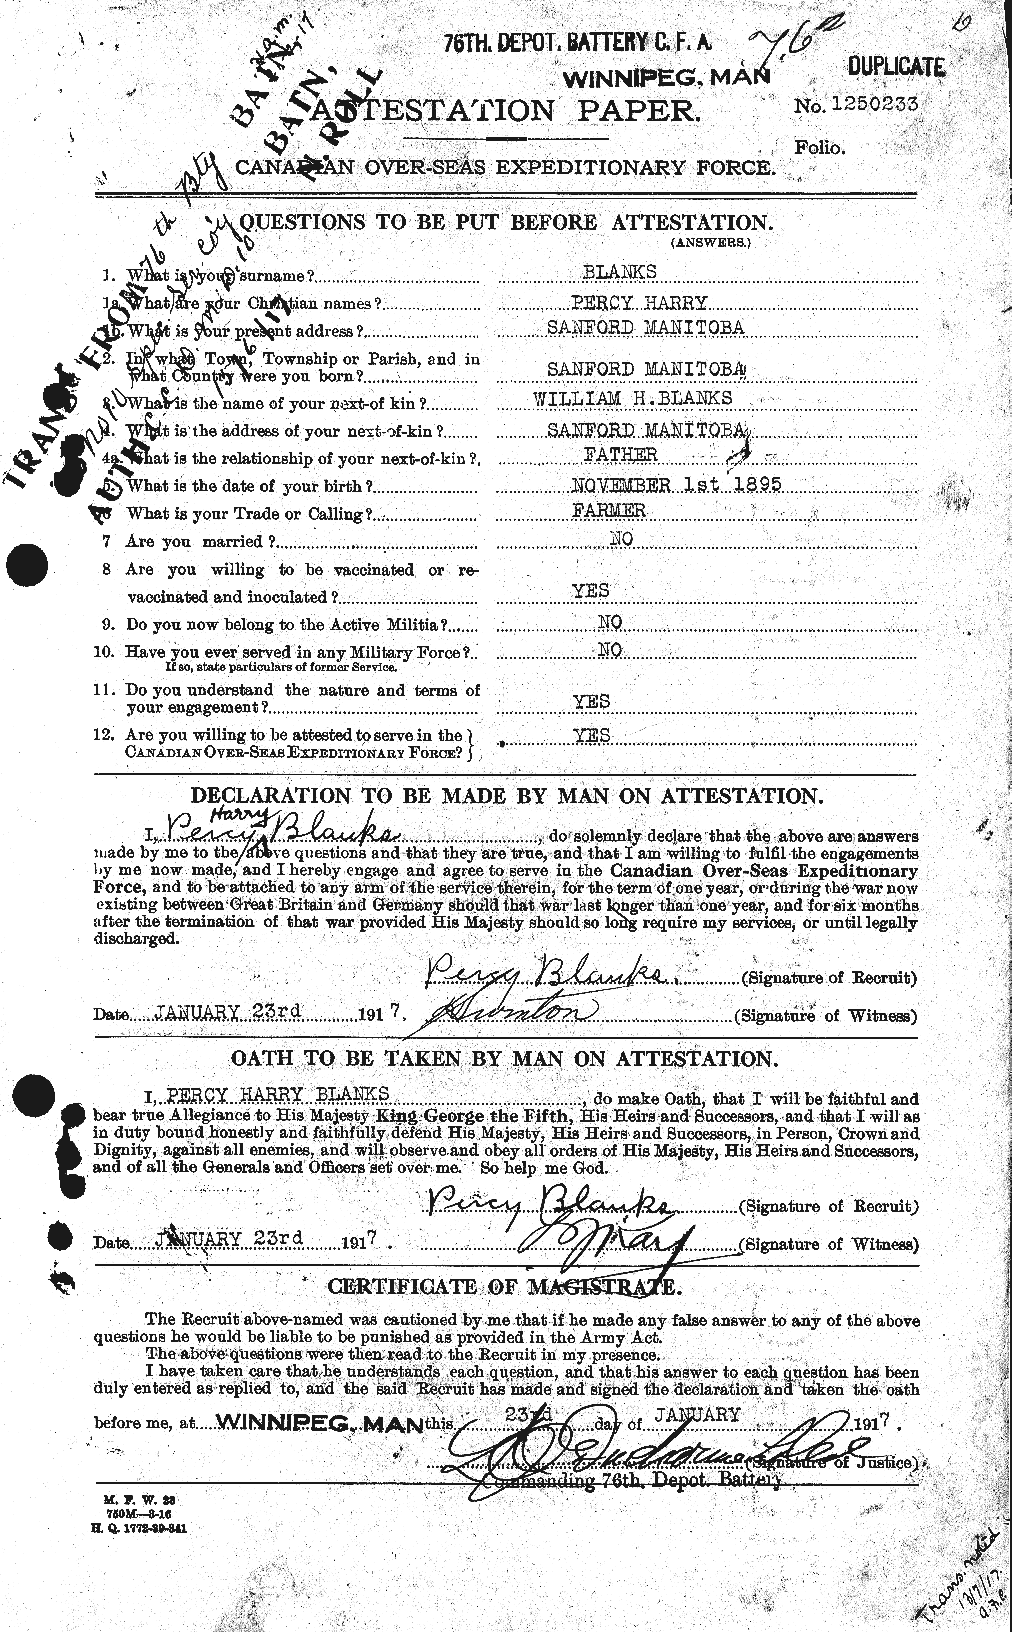 Personnel Records of the First World War - CEF 247760a